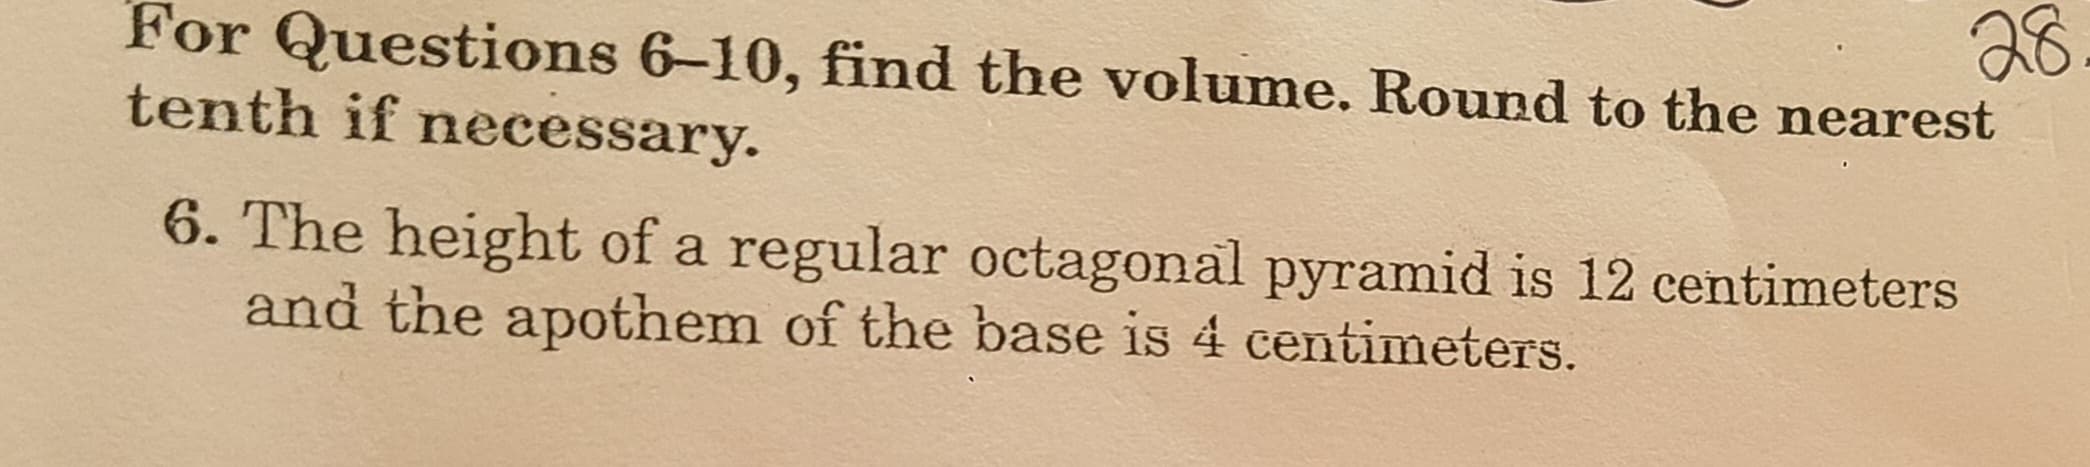 For Questions 6-10, find the volume. Round to the nearest
tenth if necessary.
28
6. The height of a regular octagonal pyramid is 12 centimeters
and the apothem of the base is 4 centimeters.